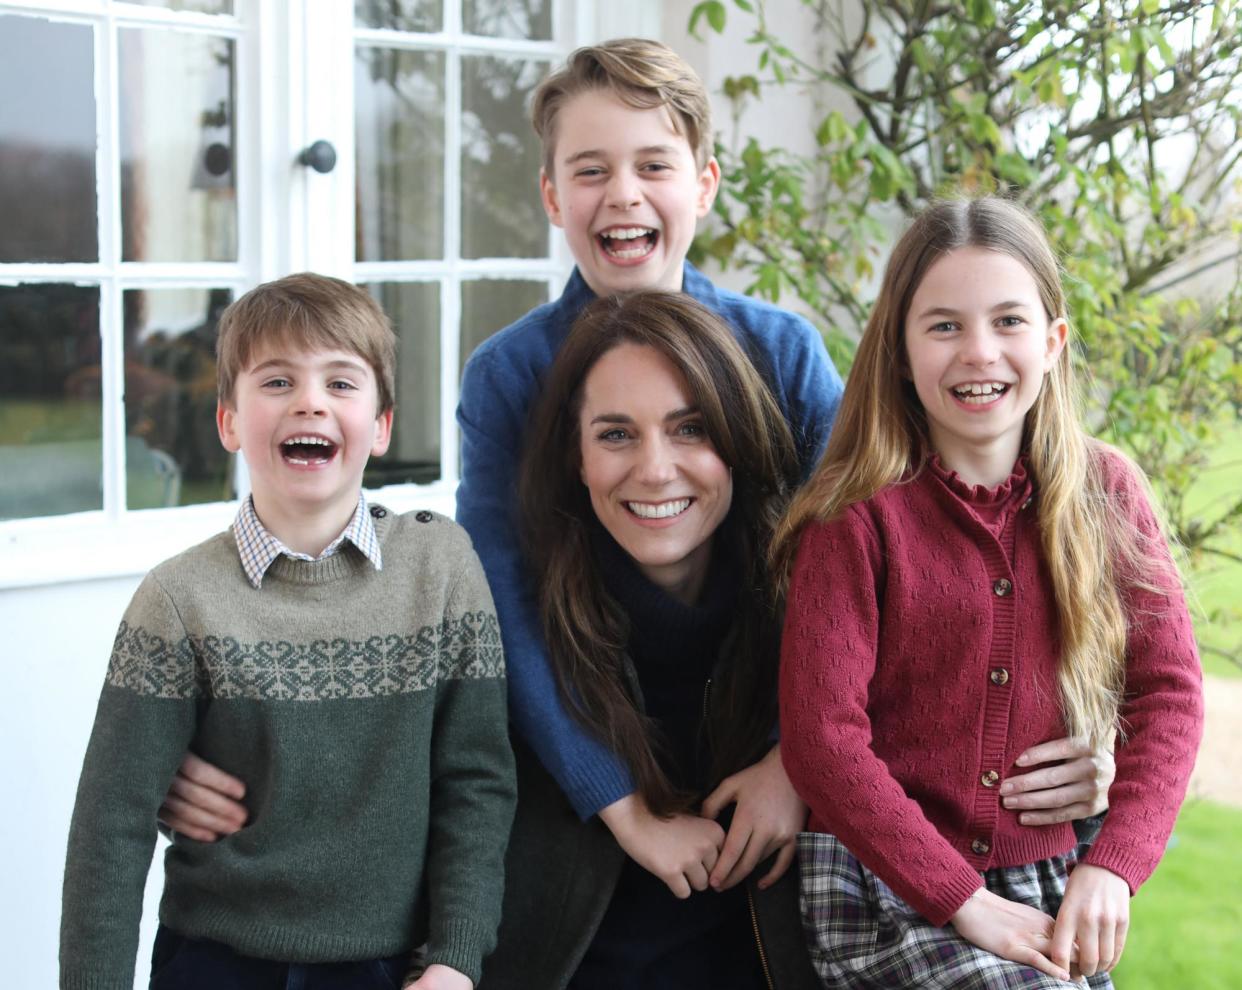 <span>The now-infamous photograph released by Kensington Palace showing the Princess of Wales with her children.</span><span>Photograph: Kensington Palace/Getty Images</span>